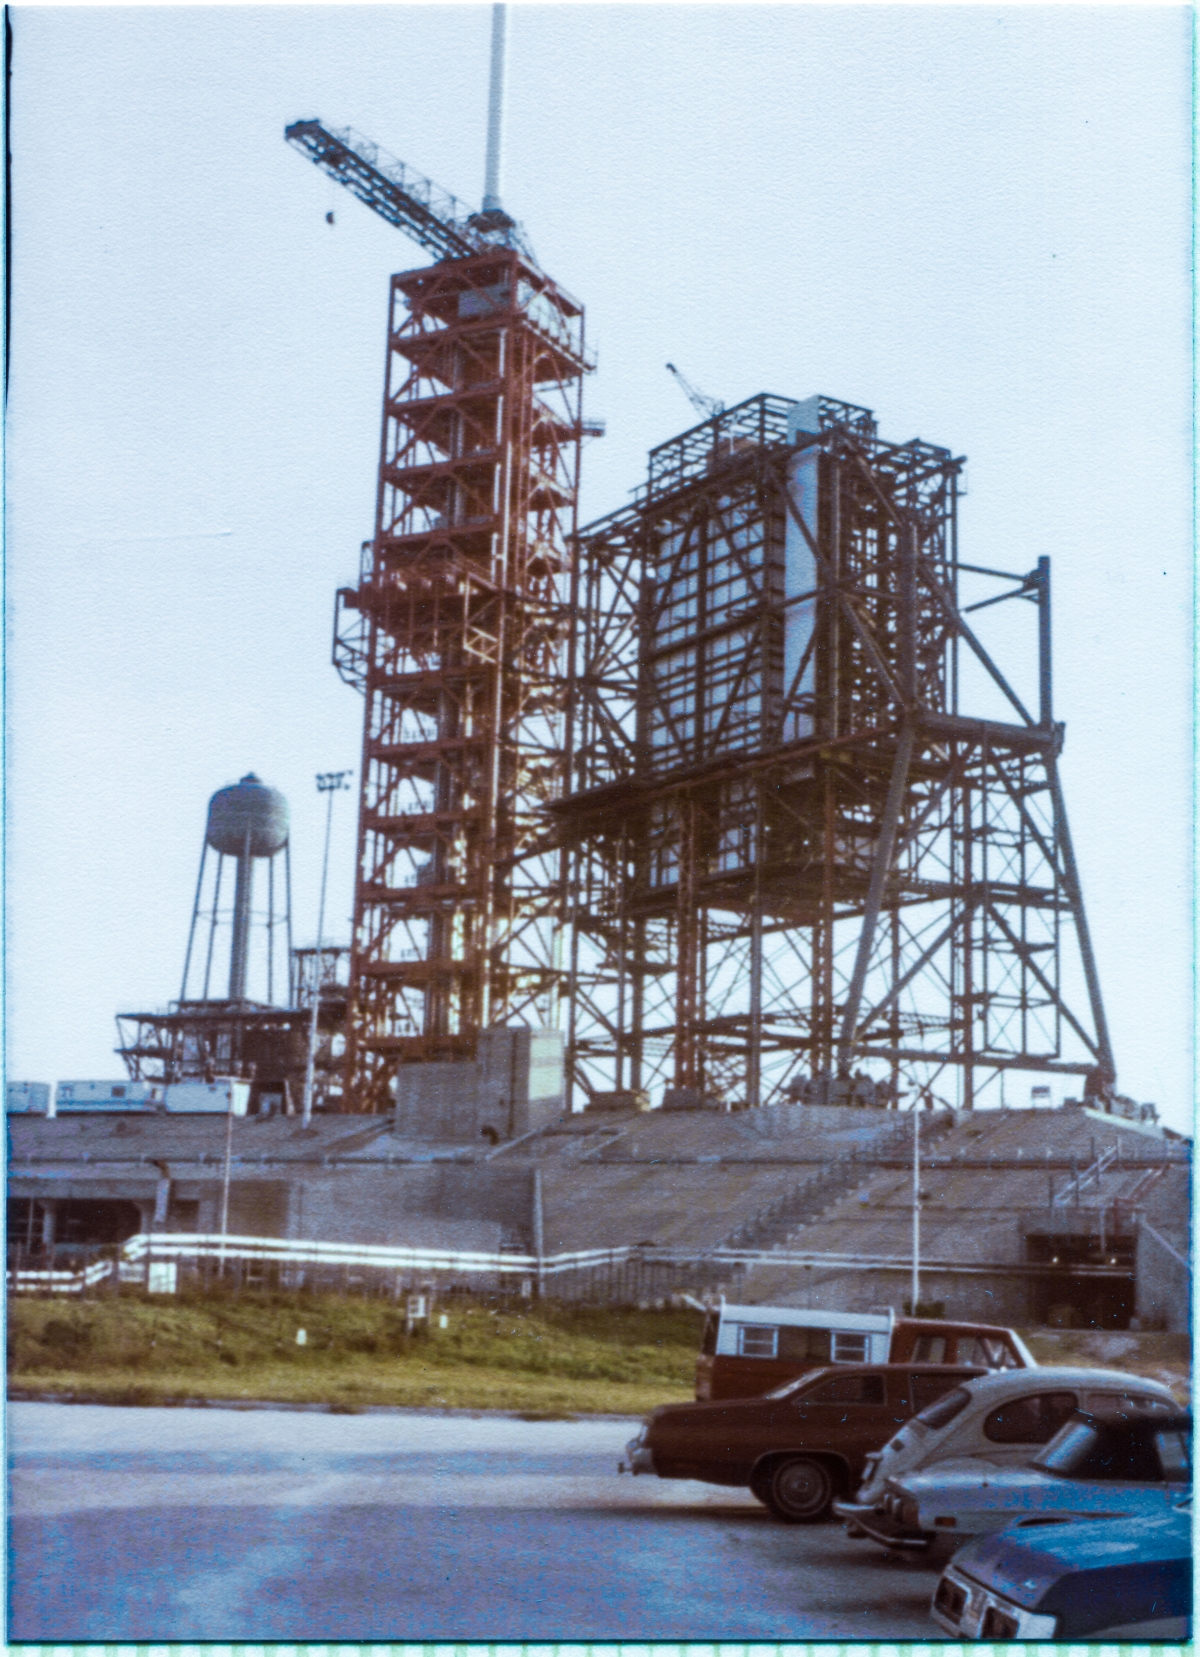 Image 005. The Great Rotating Service Structure at Space Shuttle Launch Complex 39-B, Kennedy Space Center, Florida, begins to take on its final outlines as it continues to be assembled by the Union Ironworkers of Local 808 working for Wilhoit Steel Erectors, using structural steel that was fabricated by Sheffield Steel. You are viewing it from just in front of Sheffield’s trailer in the parking lot which fronted the row of field trailers where the contractors who did the work managed their portions of the overall project, looking northeast on a crisp autumn Florida morning. Photo by James MacLaren.